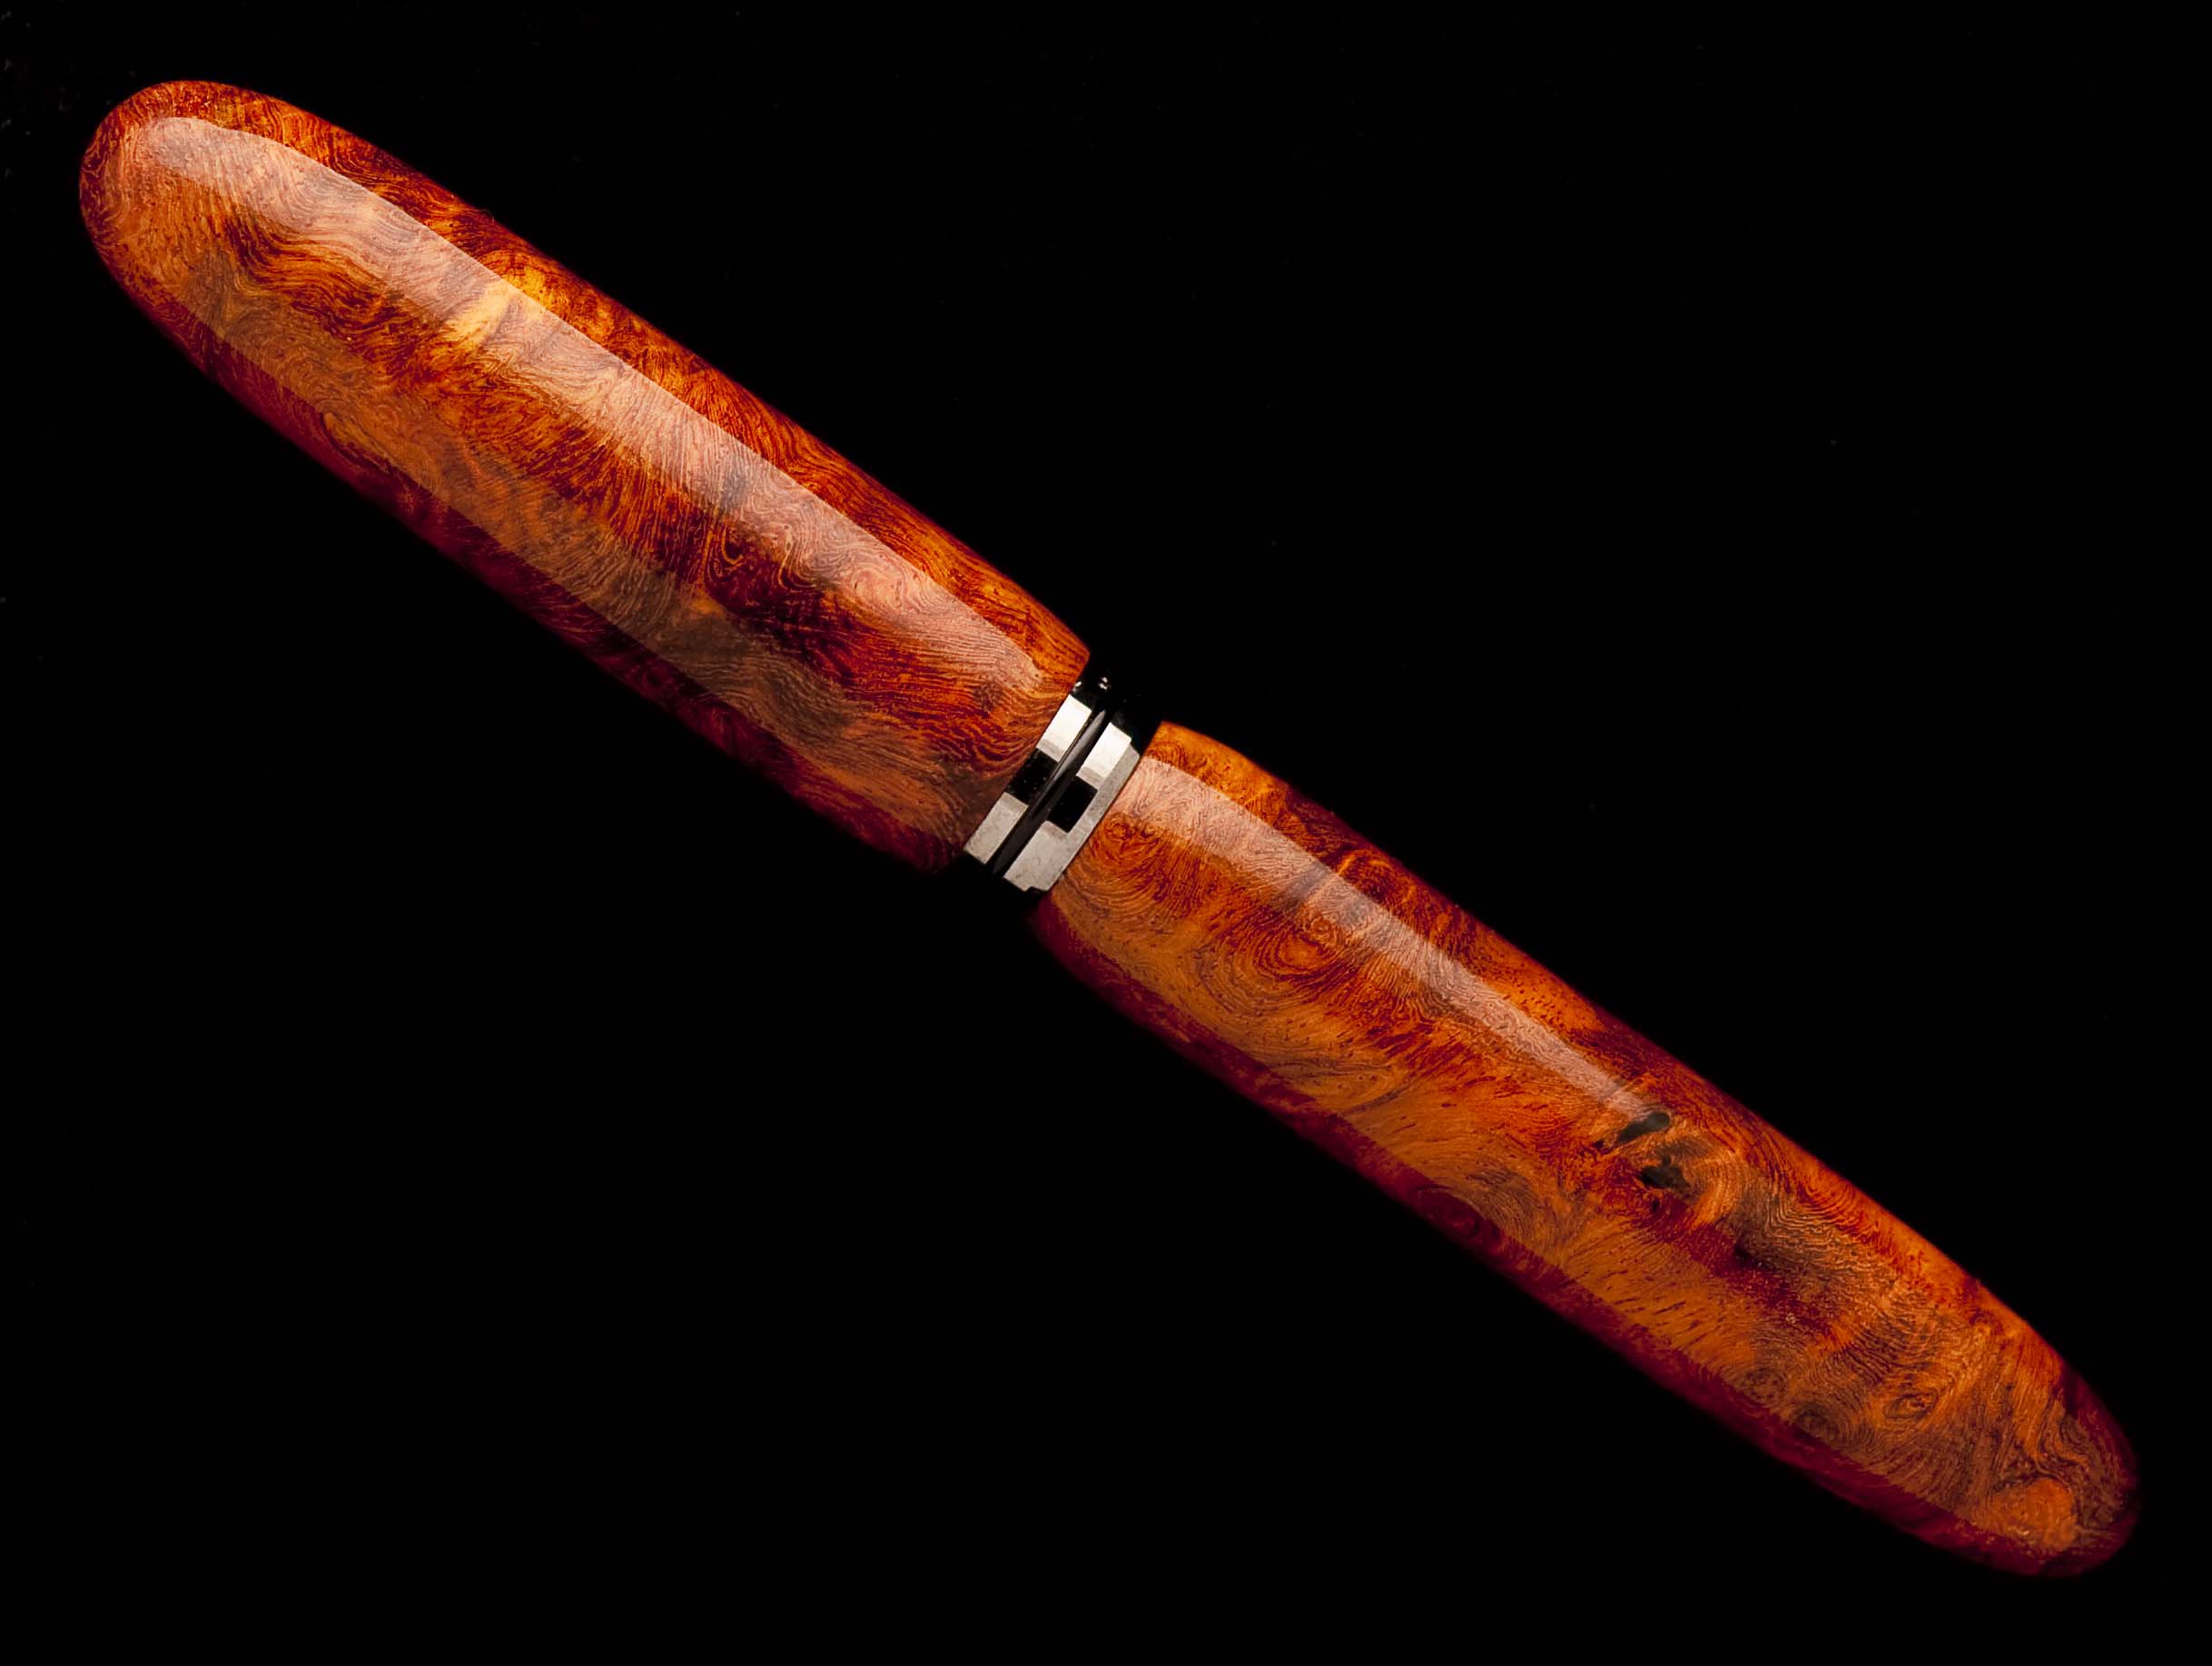 Revised Double Closed Ended Amboyna Burl Pen